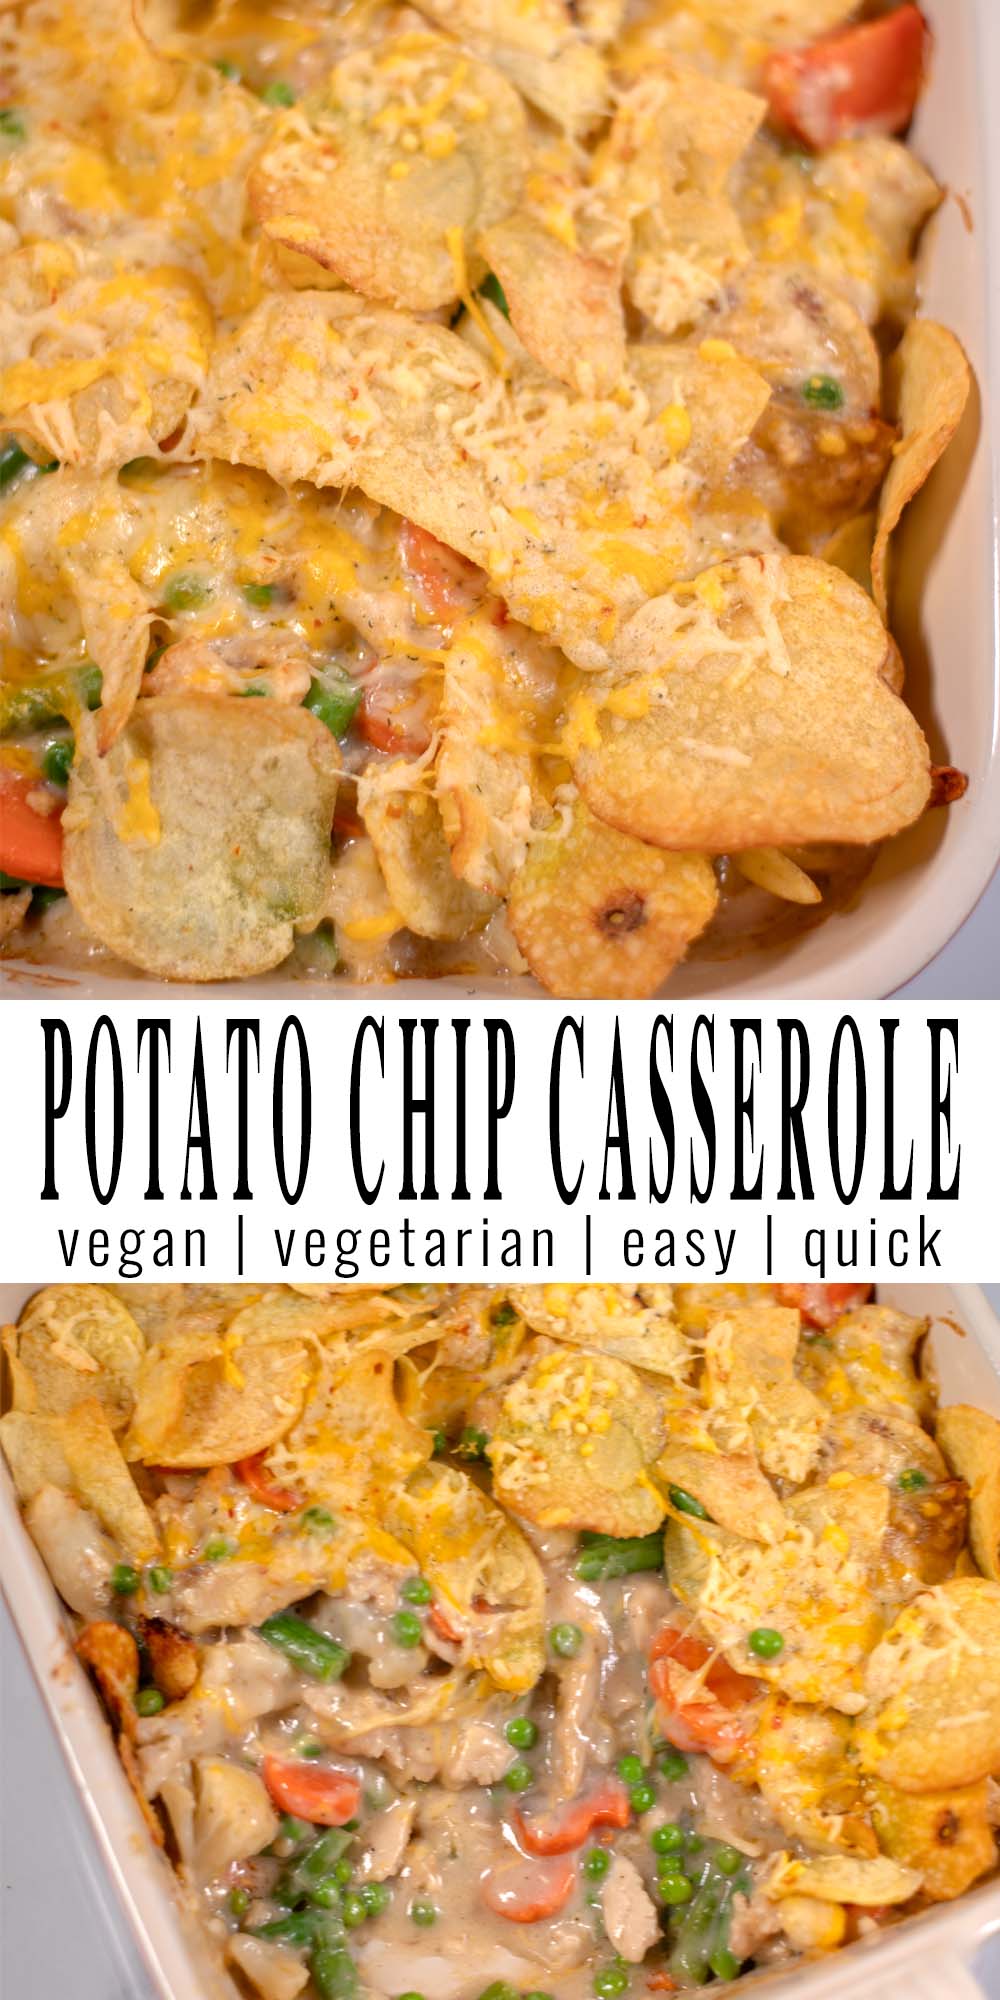 Collage of two photos showing Potato Chip Casserole with recipe title text.